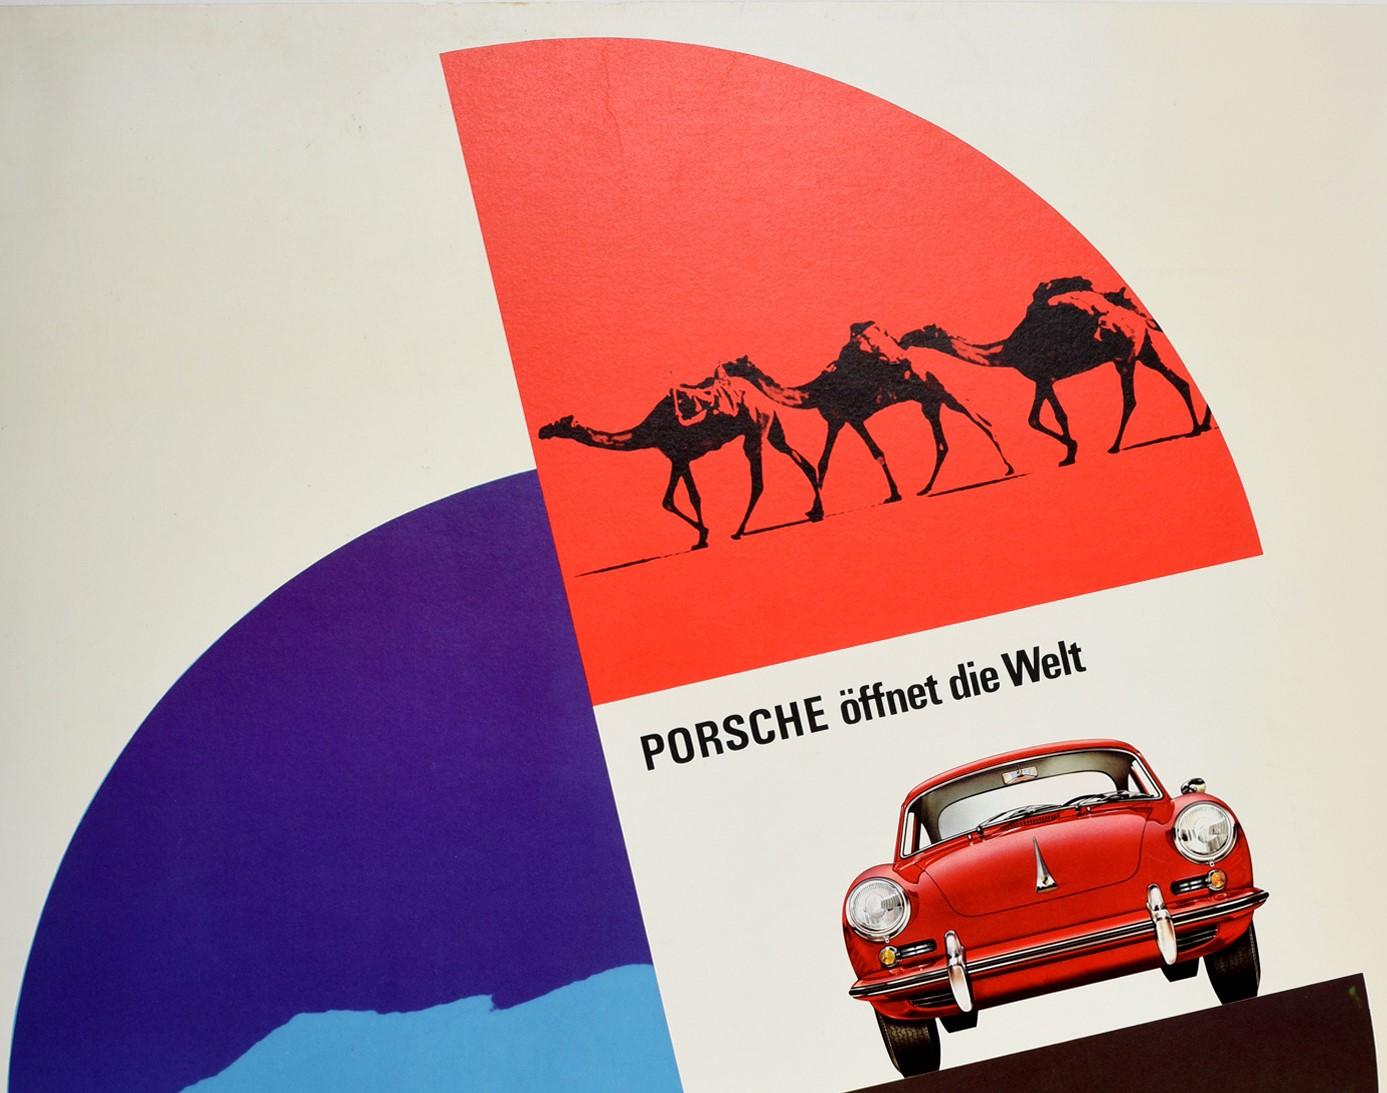 Original rare early vintage car advertising poster for Porsche - Offnet die Welt / Opens the World - featuring a bold graphic design by Hanns Lohrer (1912-1995), who worked on the visual identity of the Porsche brand worldwide during the